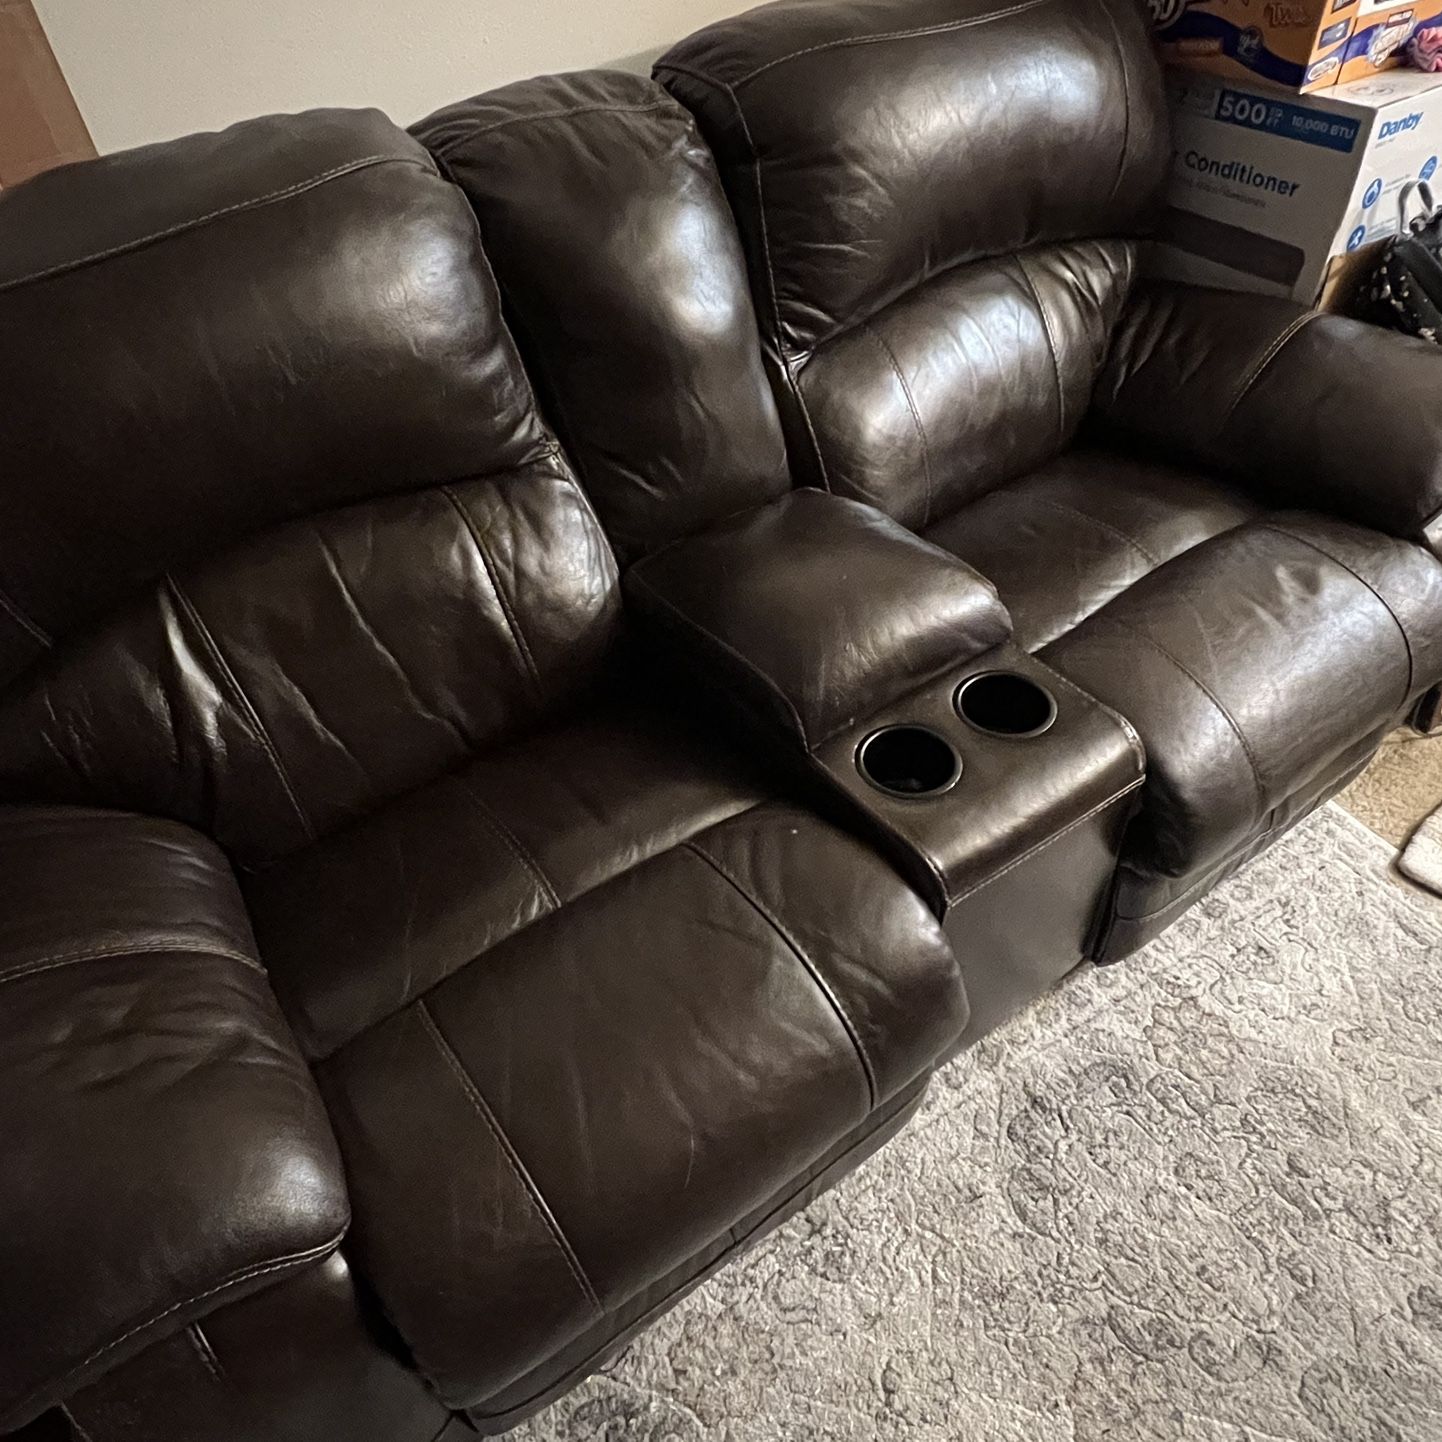 Espresso, brown leather couch